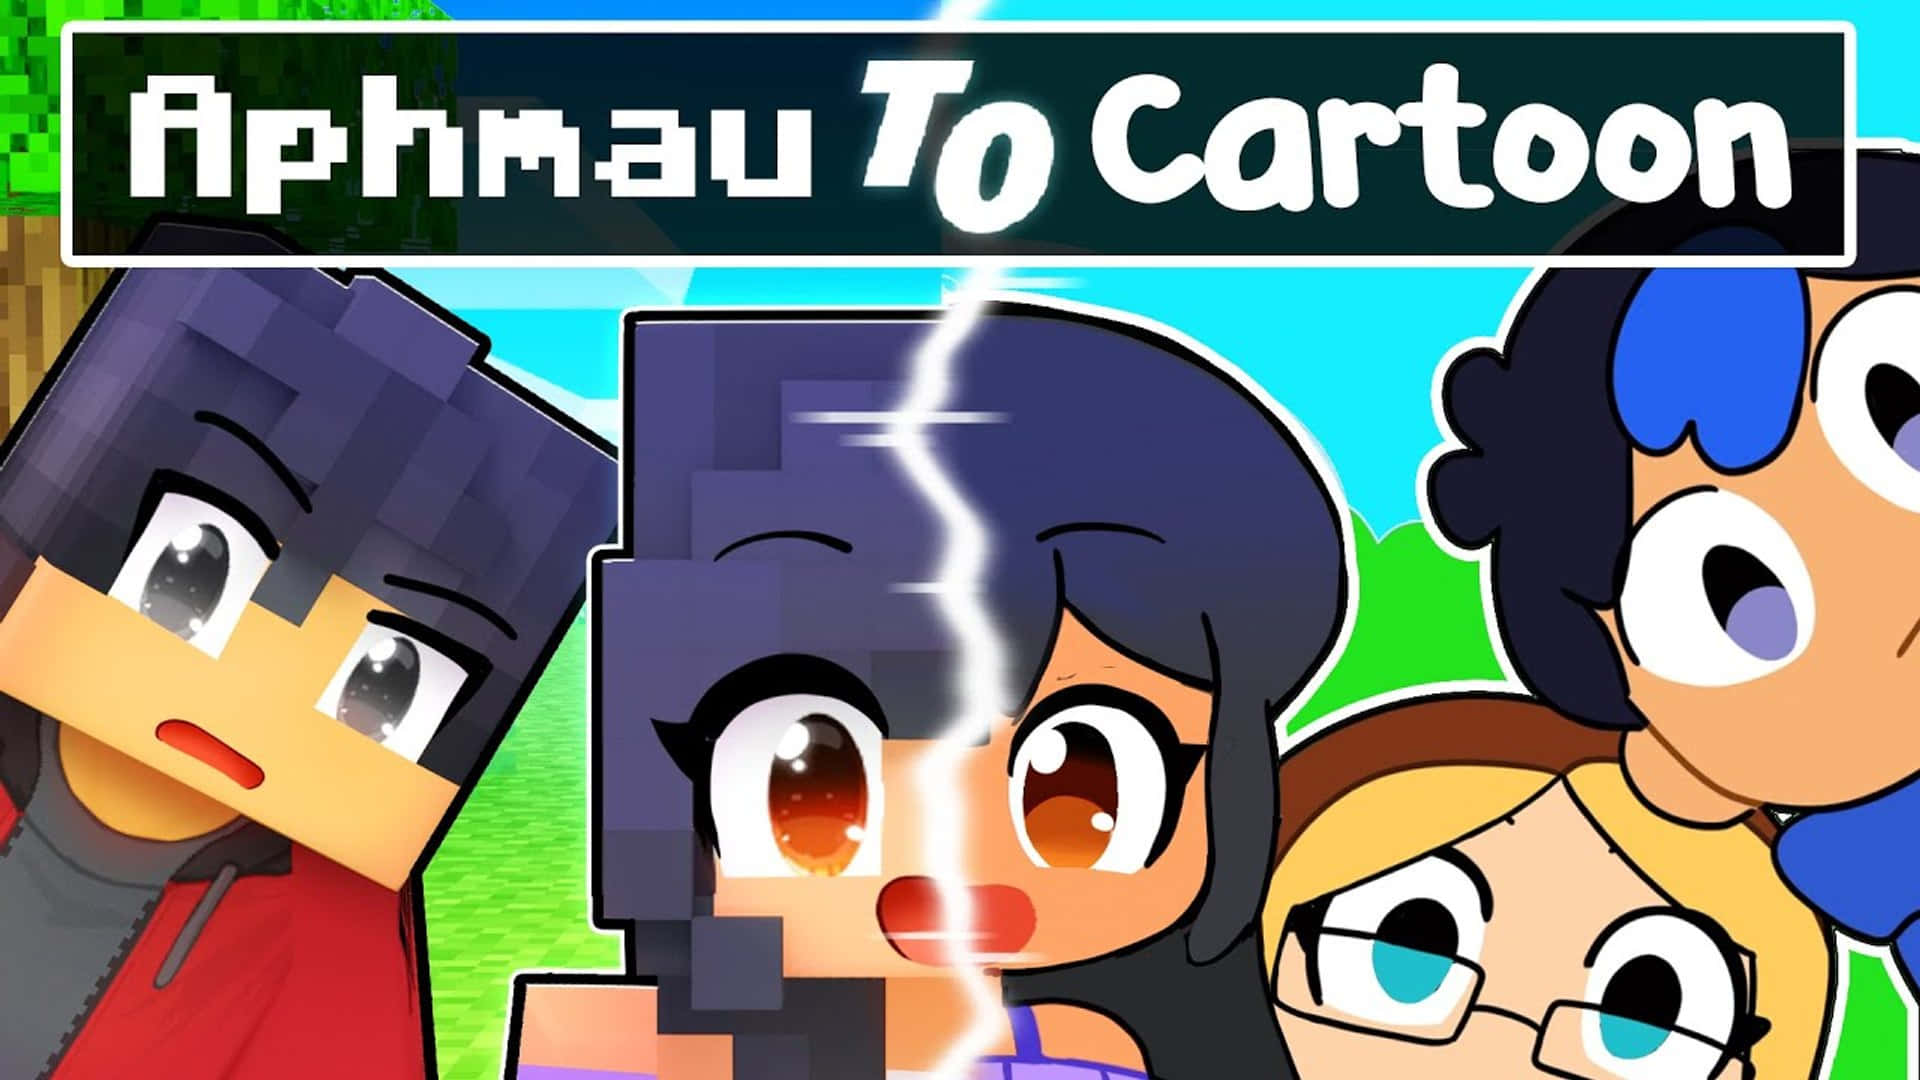 Aphmau takes on a fun and thrilling story in an enchanting new world.